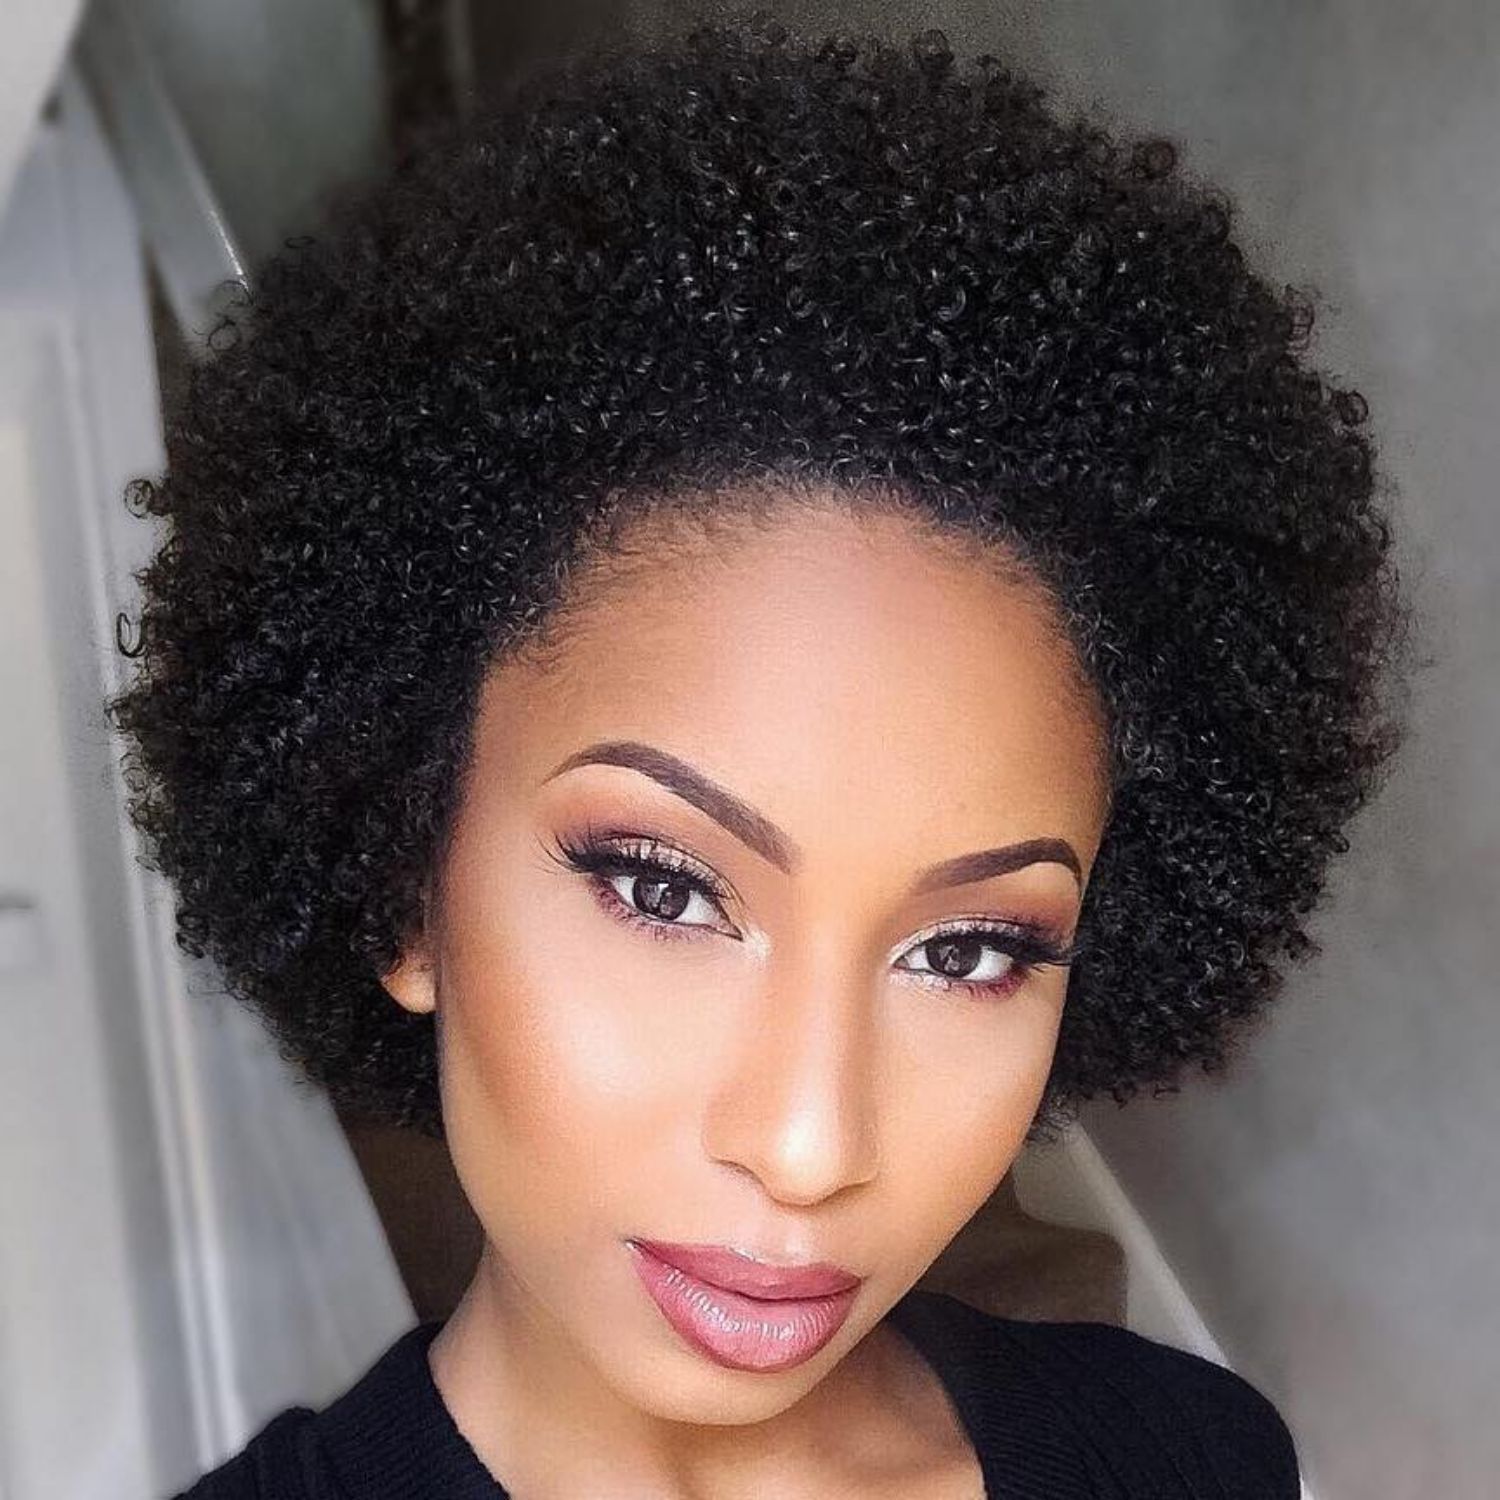 Afro-hairstyle- 70+ Outdated Hairstyle Ideas Coming Back in 2021